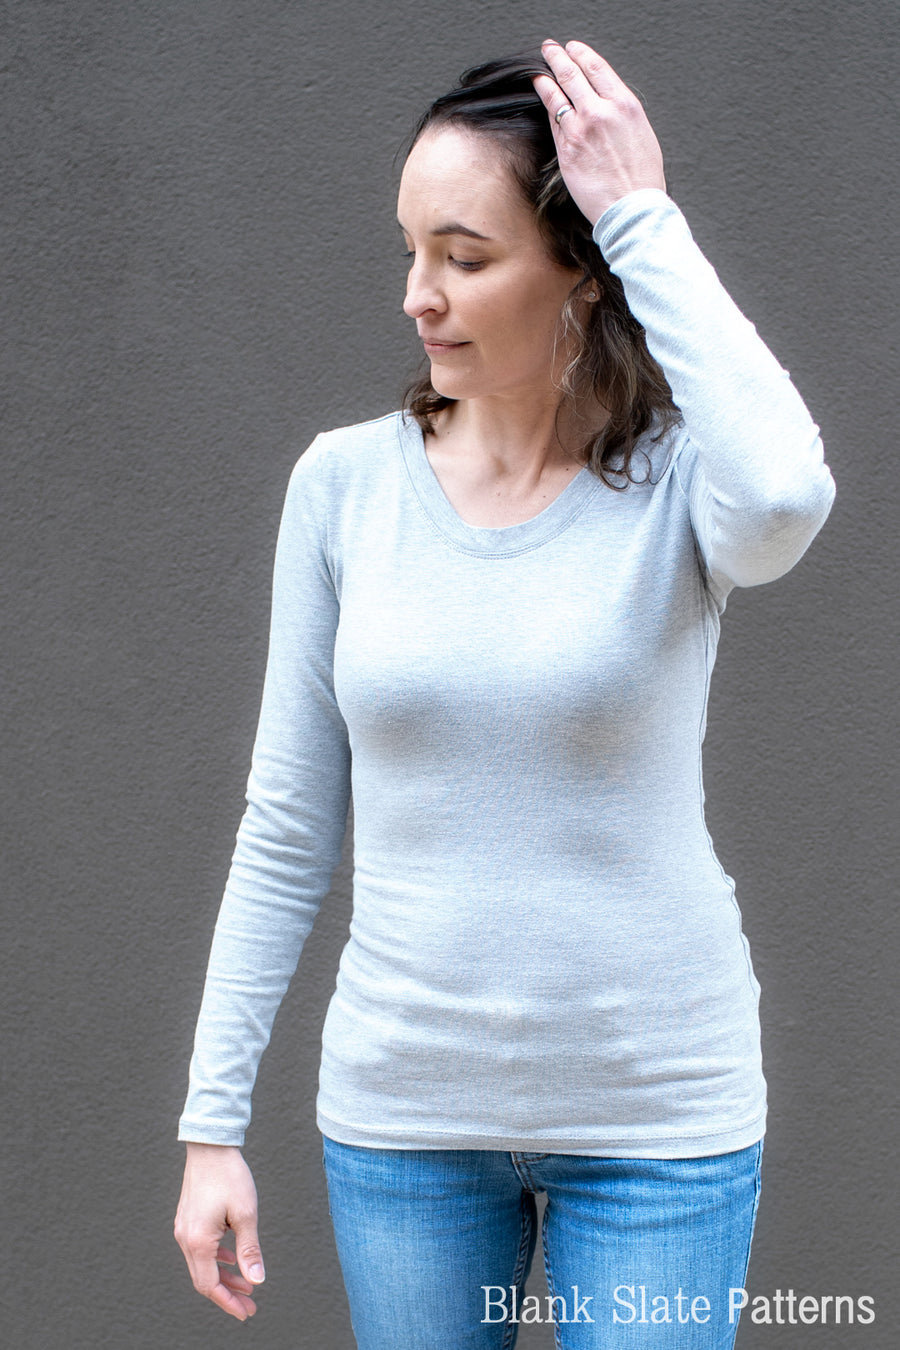 Women's Plus Size Fitted T-shirt Sewing Pattern - Abrazo Tee by Blank Slate Patterns